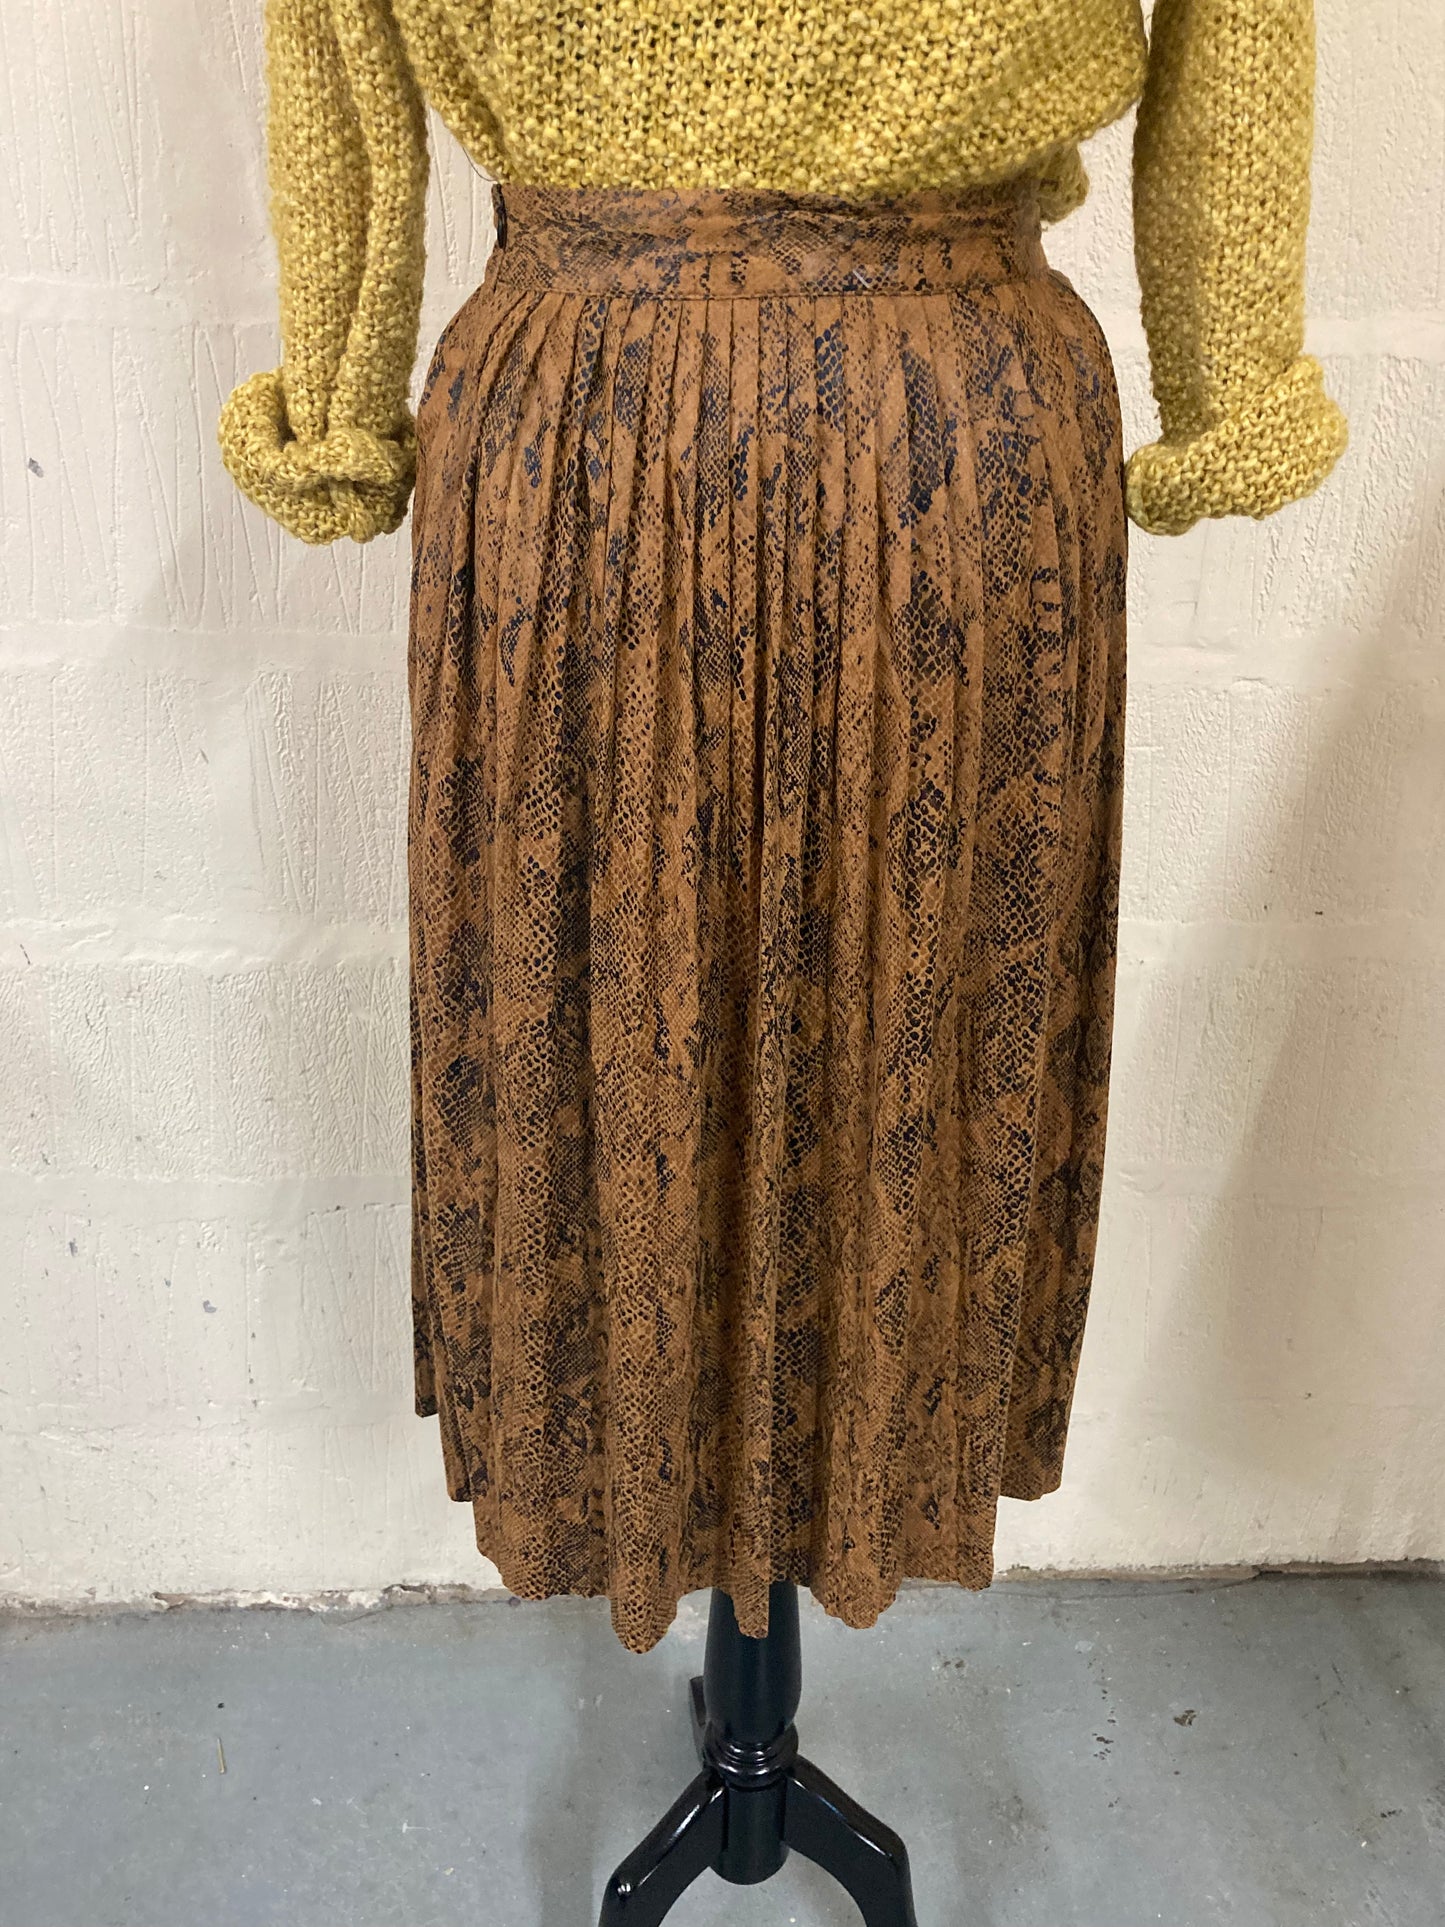 Snakeskin Suedette Brown and Black Pleated Midi Skirt Size 10